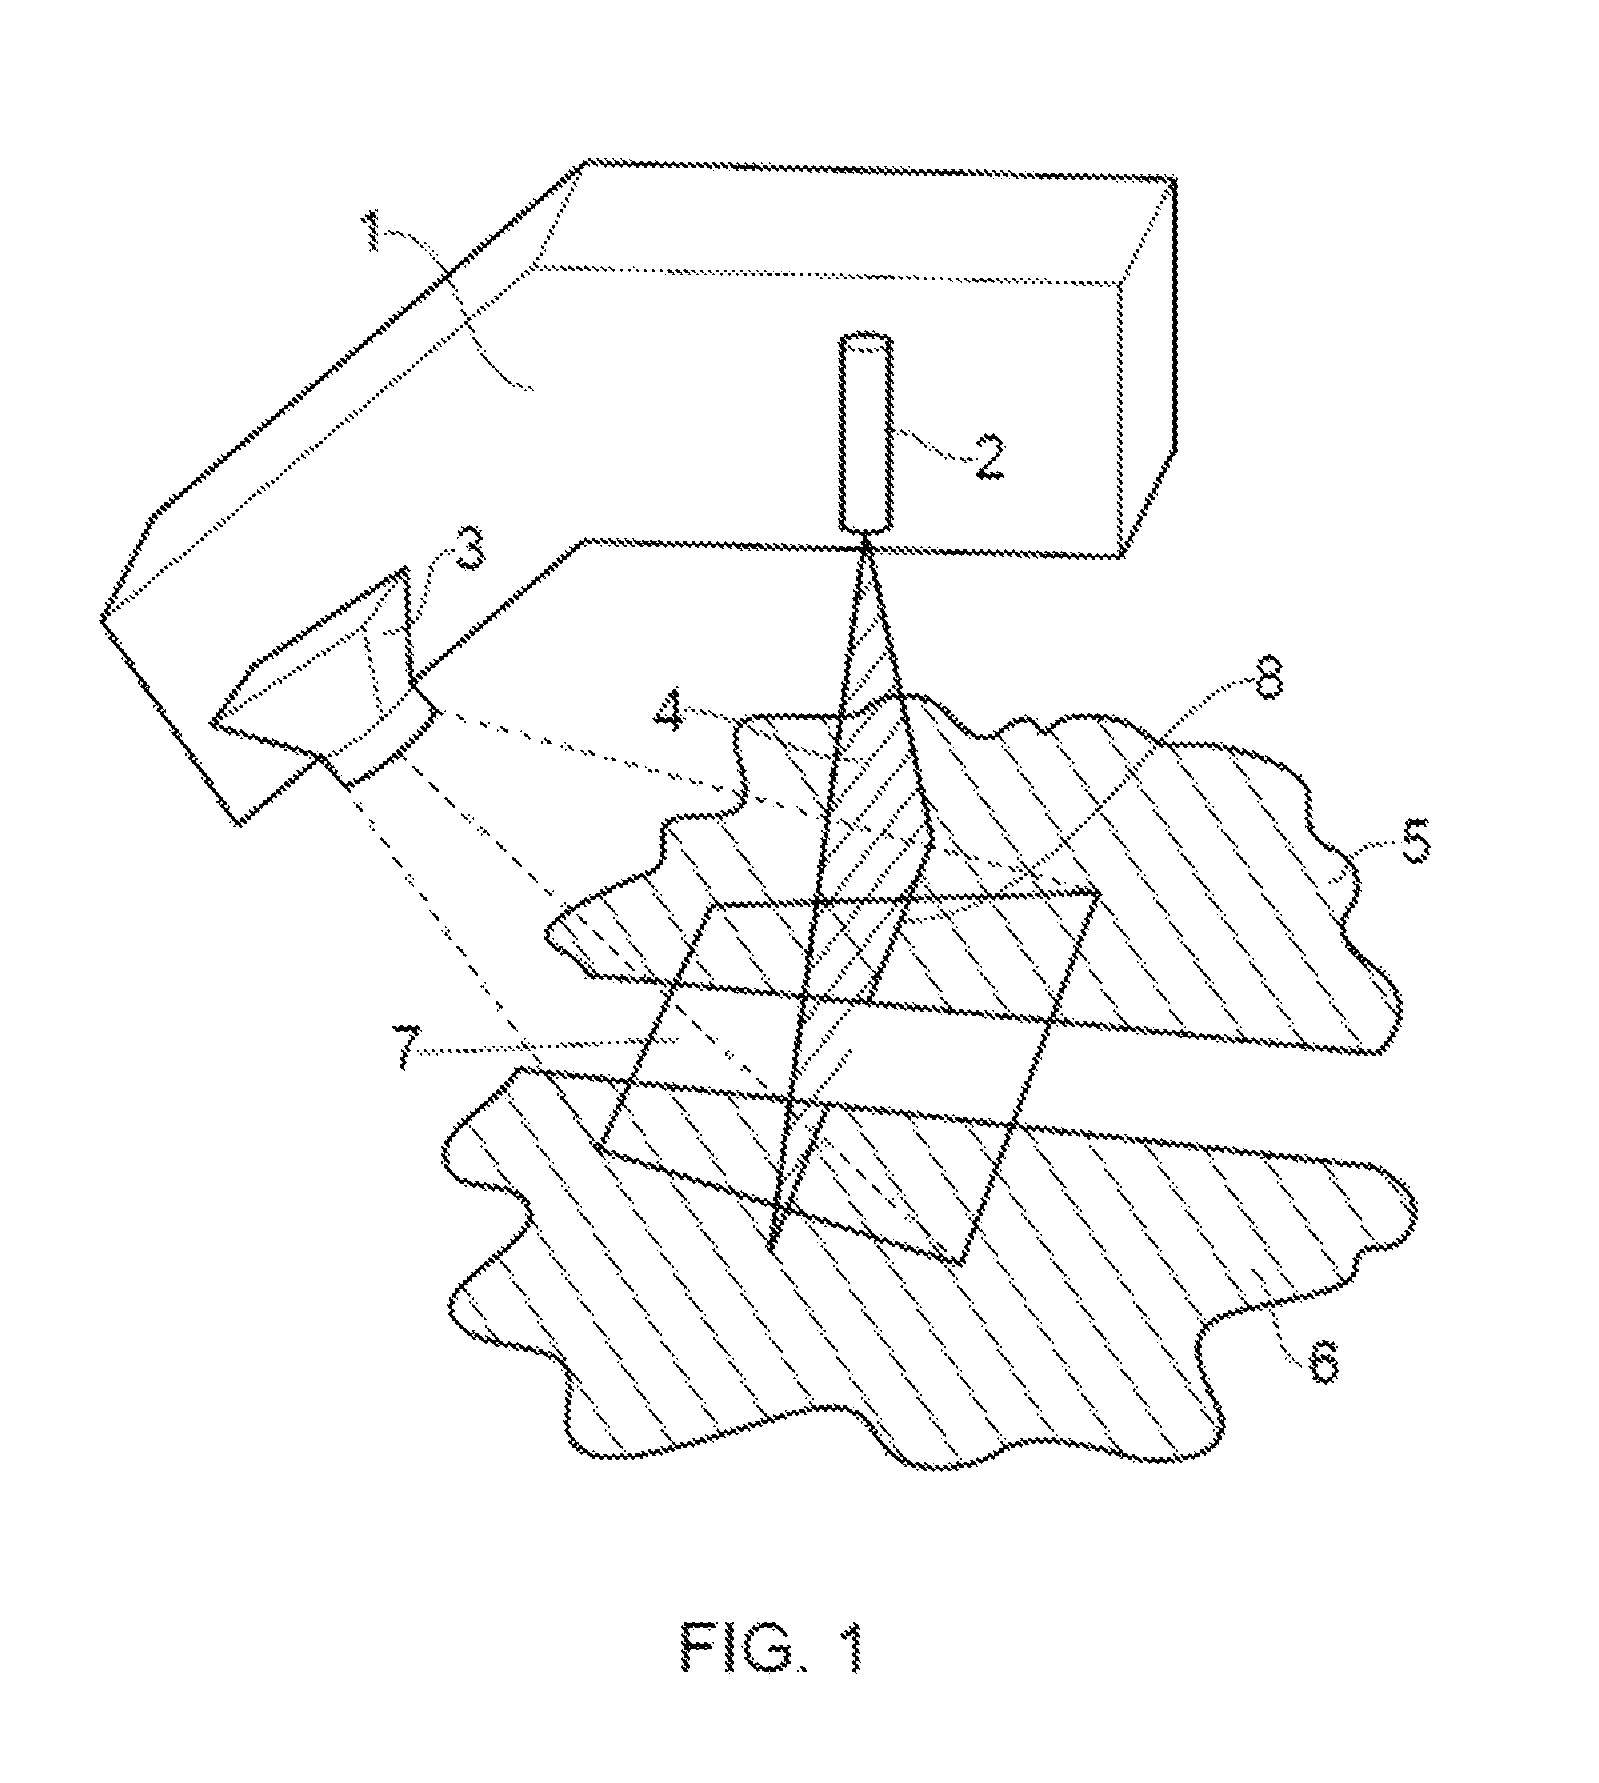 Positioning device for an optical triangulation sensor